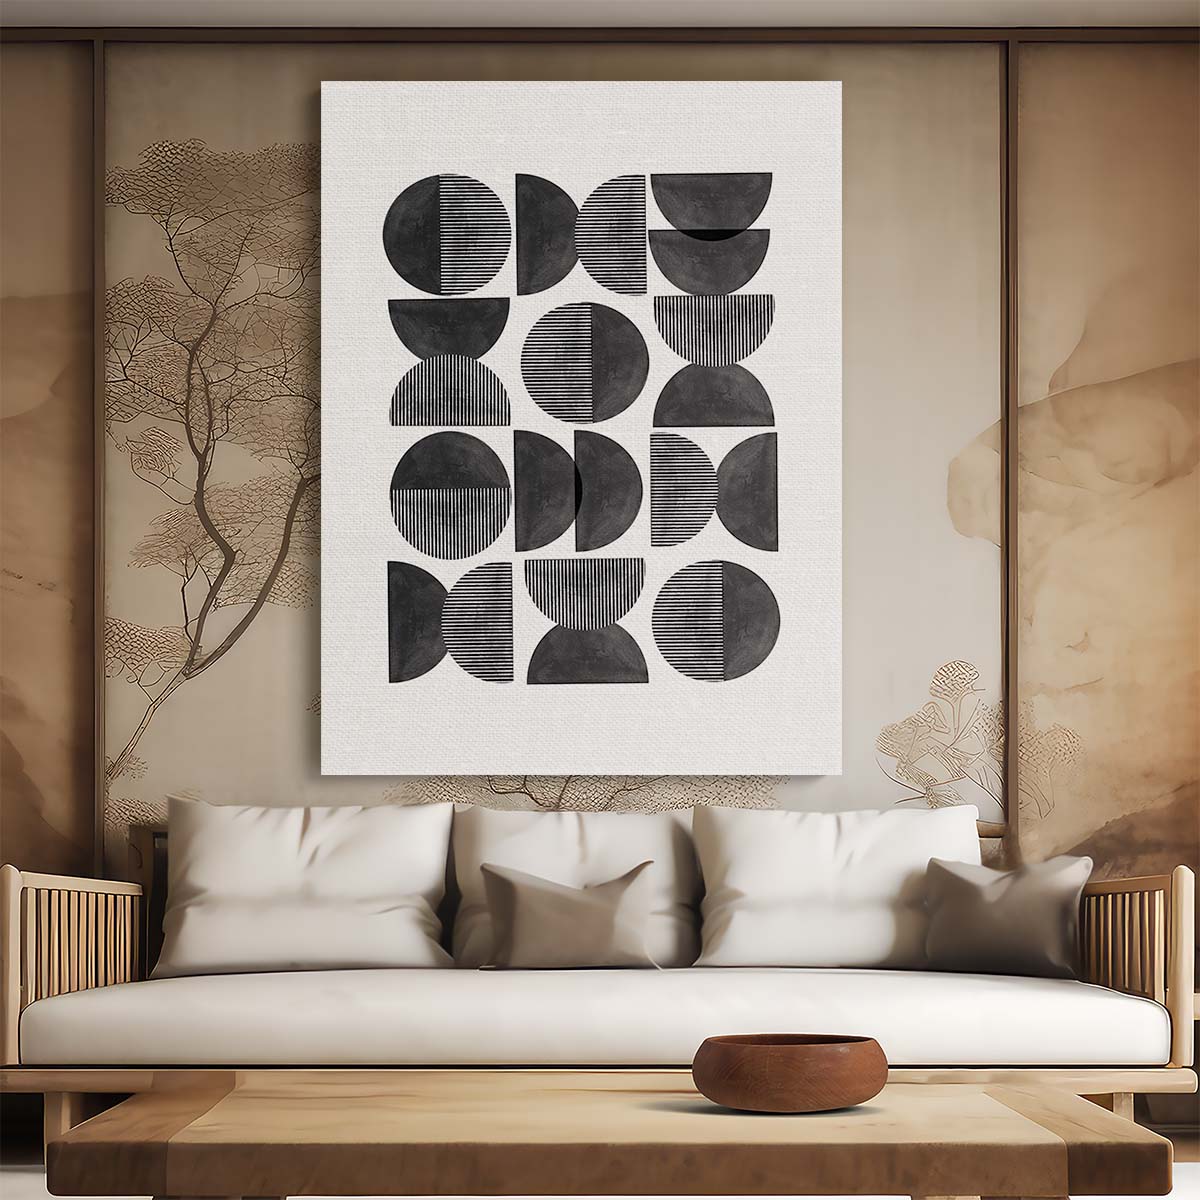 Mid-Century Geometric Illustration Artwork Abstract Monochrome Pattern by THE MIUUS STUDIO by Luxuriance Designs, made in USA